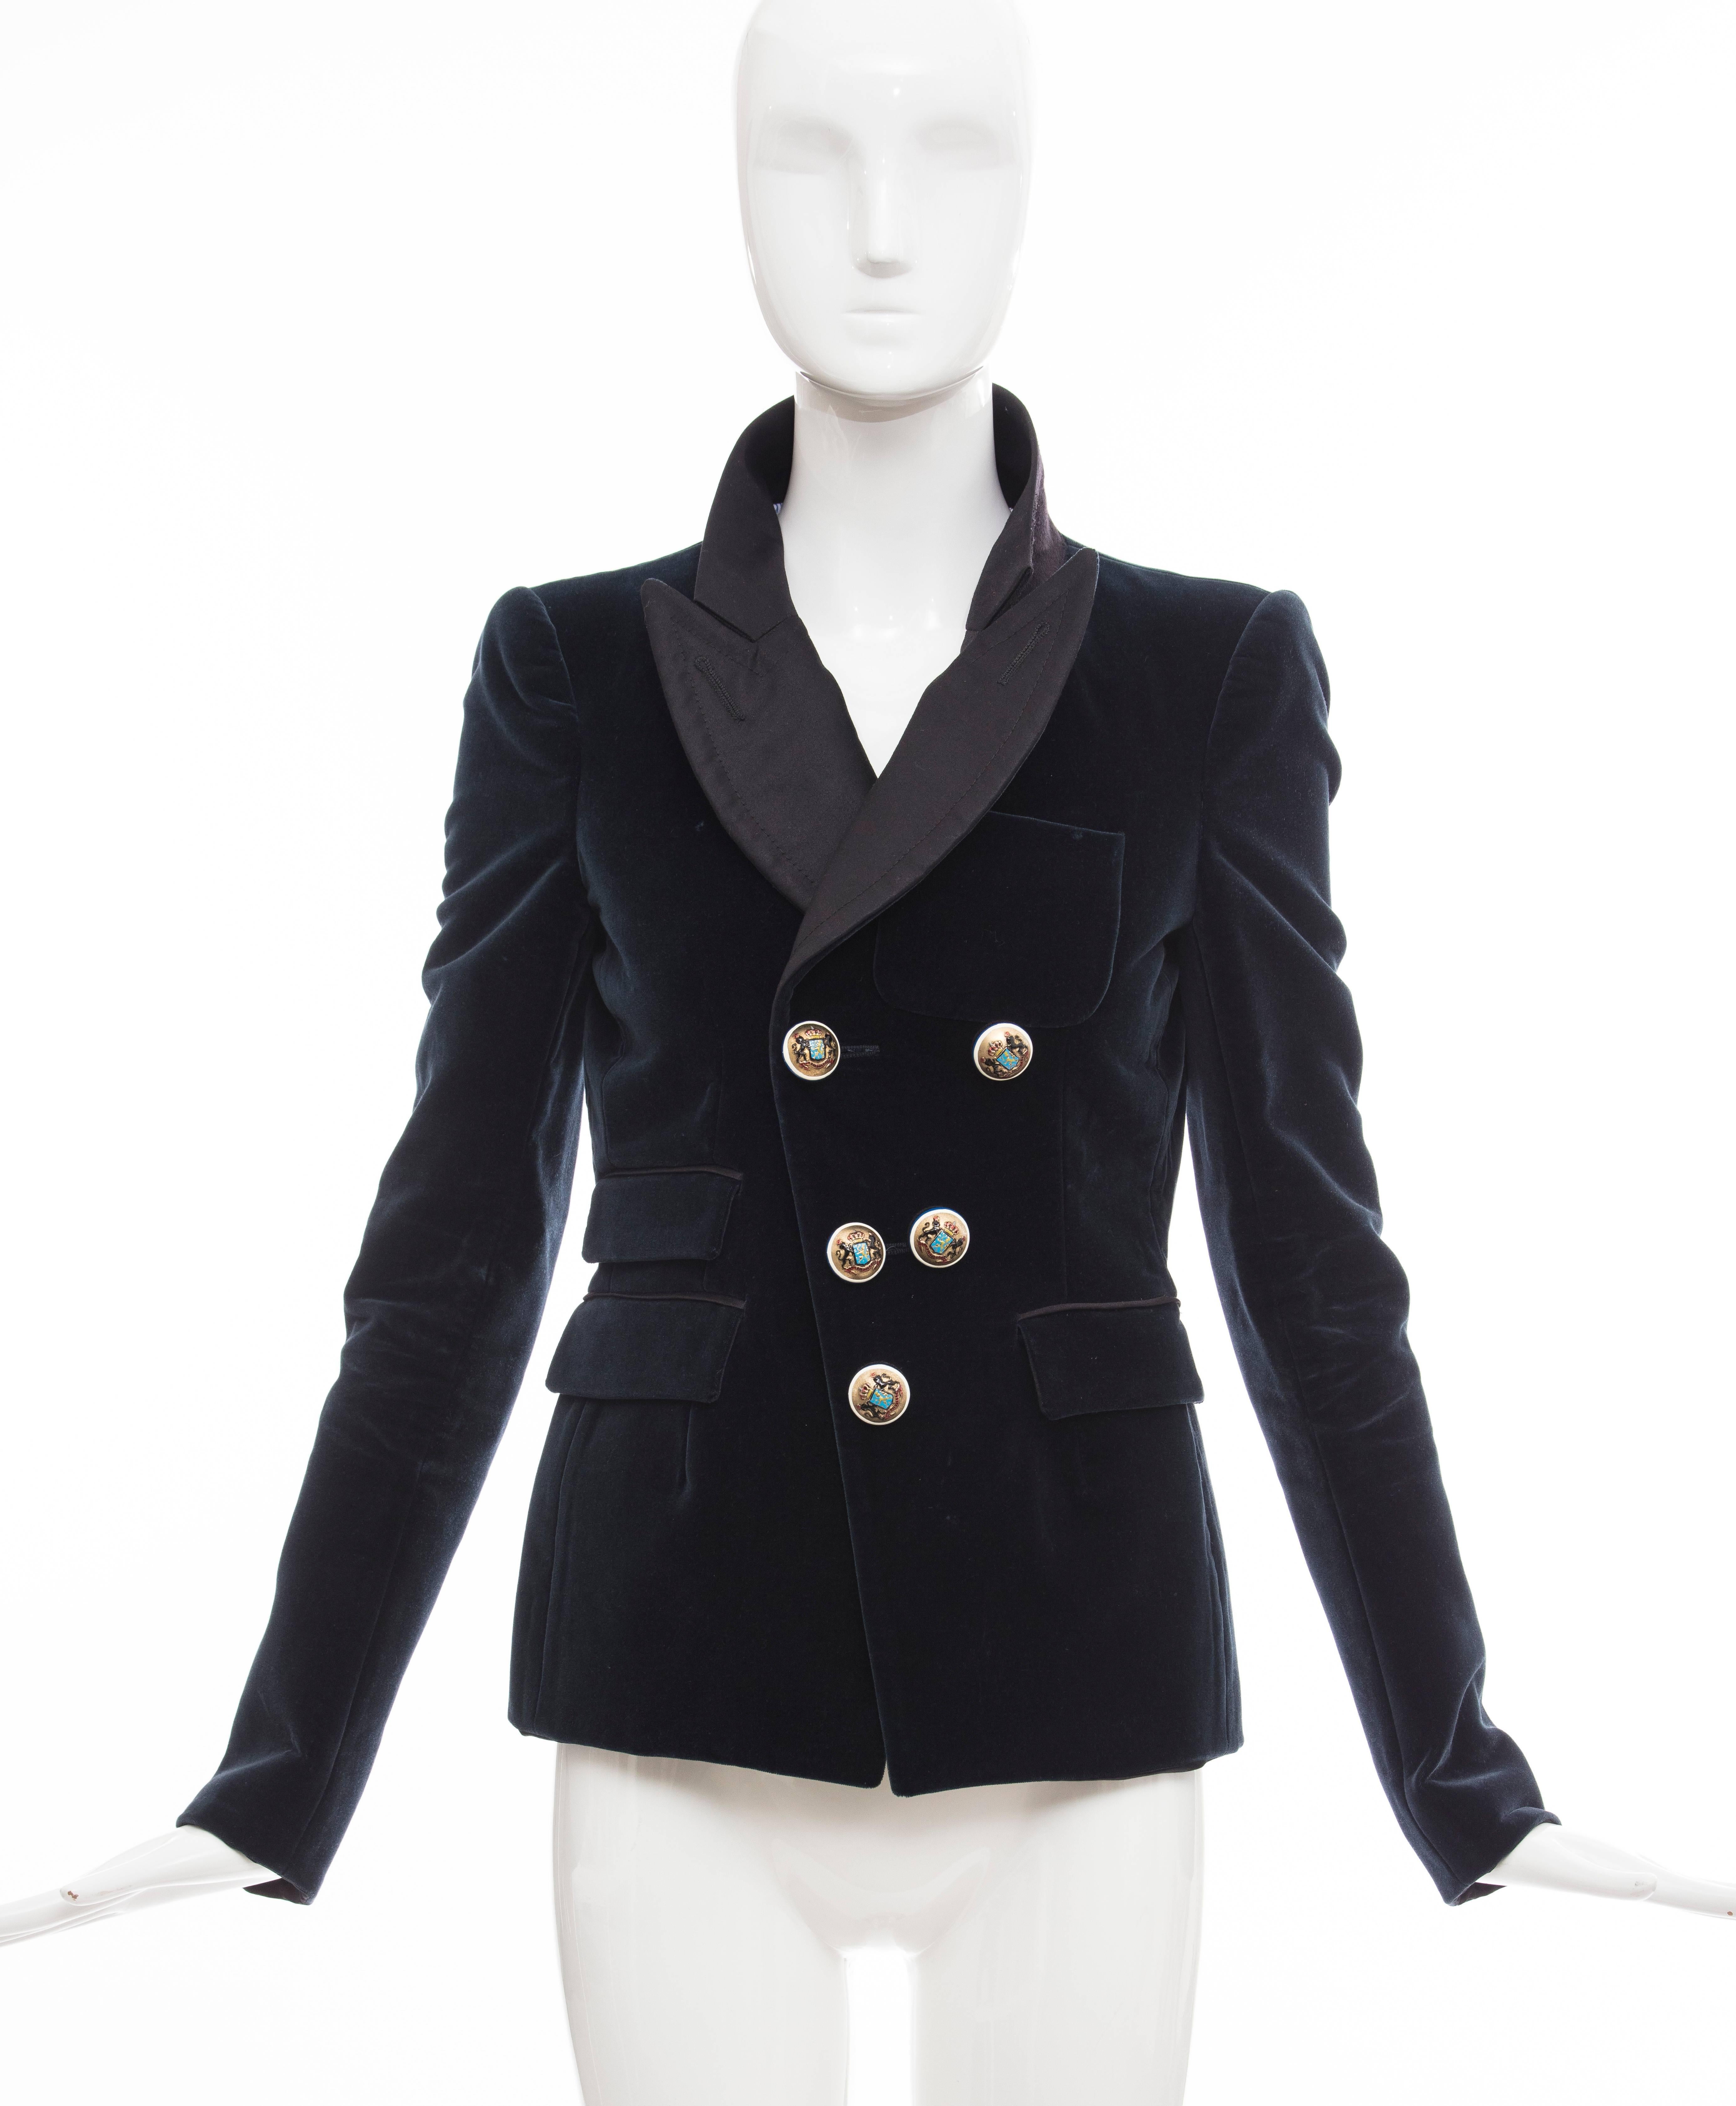 Nicolas Ghesquière for Balenciaga, Autumn-Winter 2007 blue velvet blazer with tonal stitching throughout, structured shoulders, wide peaked lapel, three flap pockets and enameled button closures at front.

EU. 38
US. 6

Bust: 36, Waist 34, Shoulder